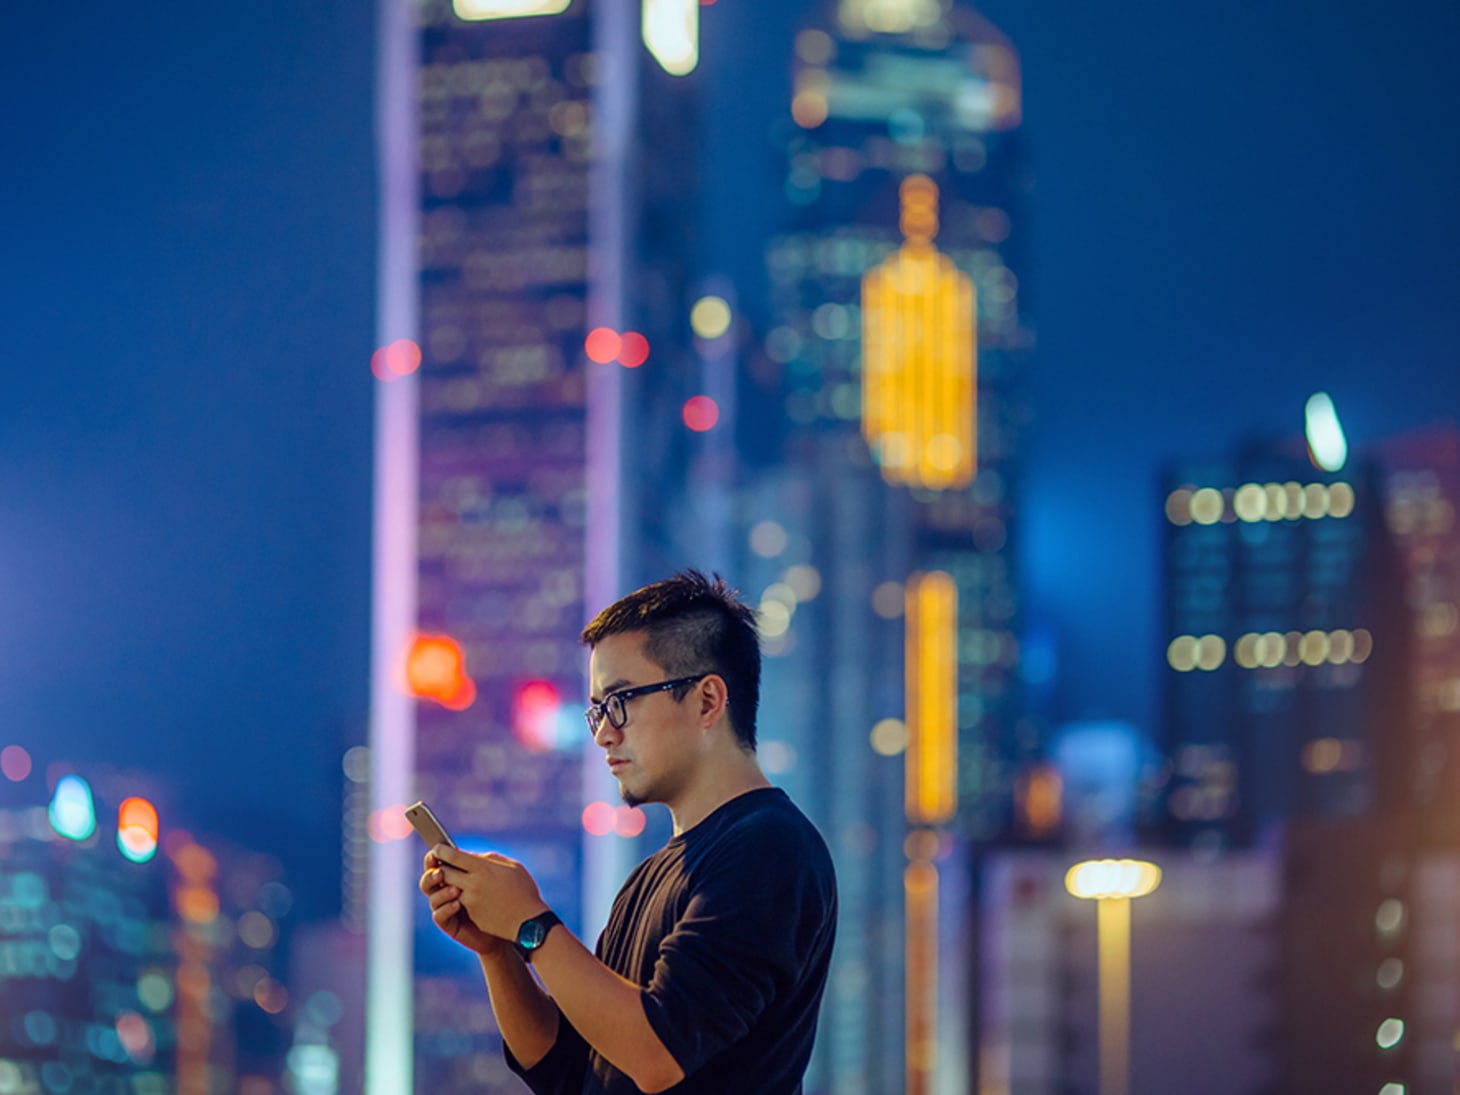 man in glasses, looking at phone in front of city scape at night